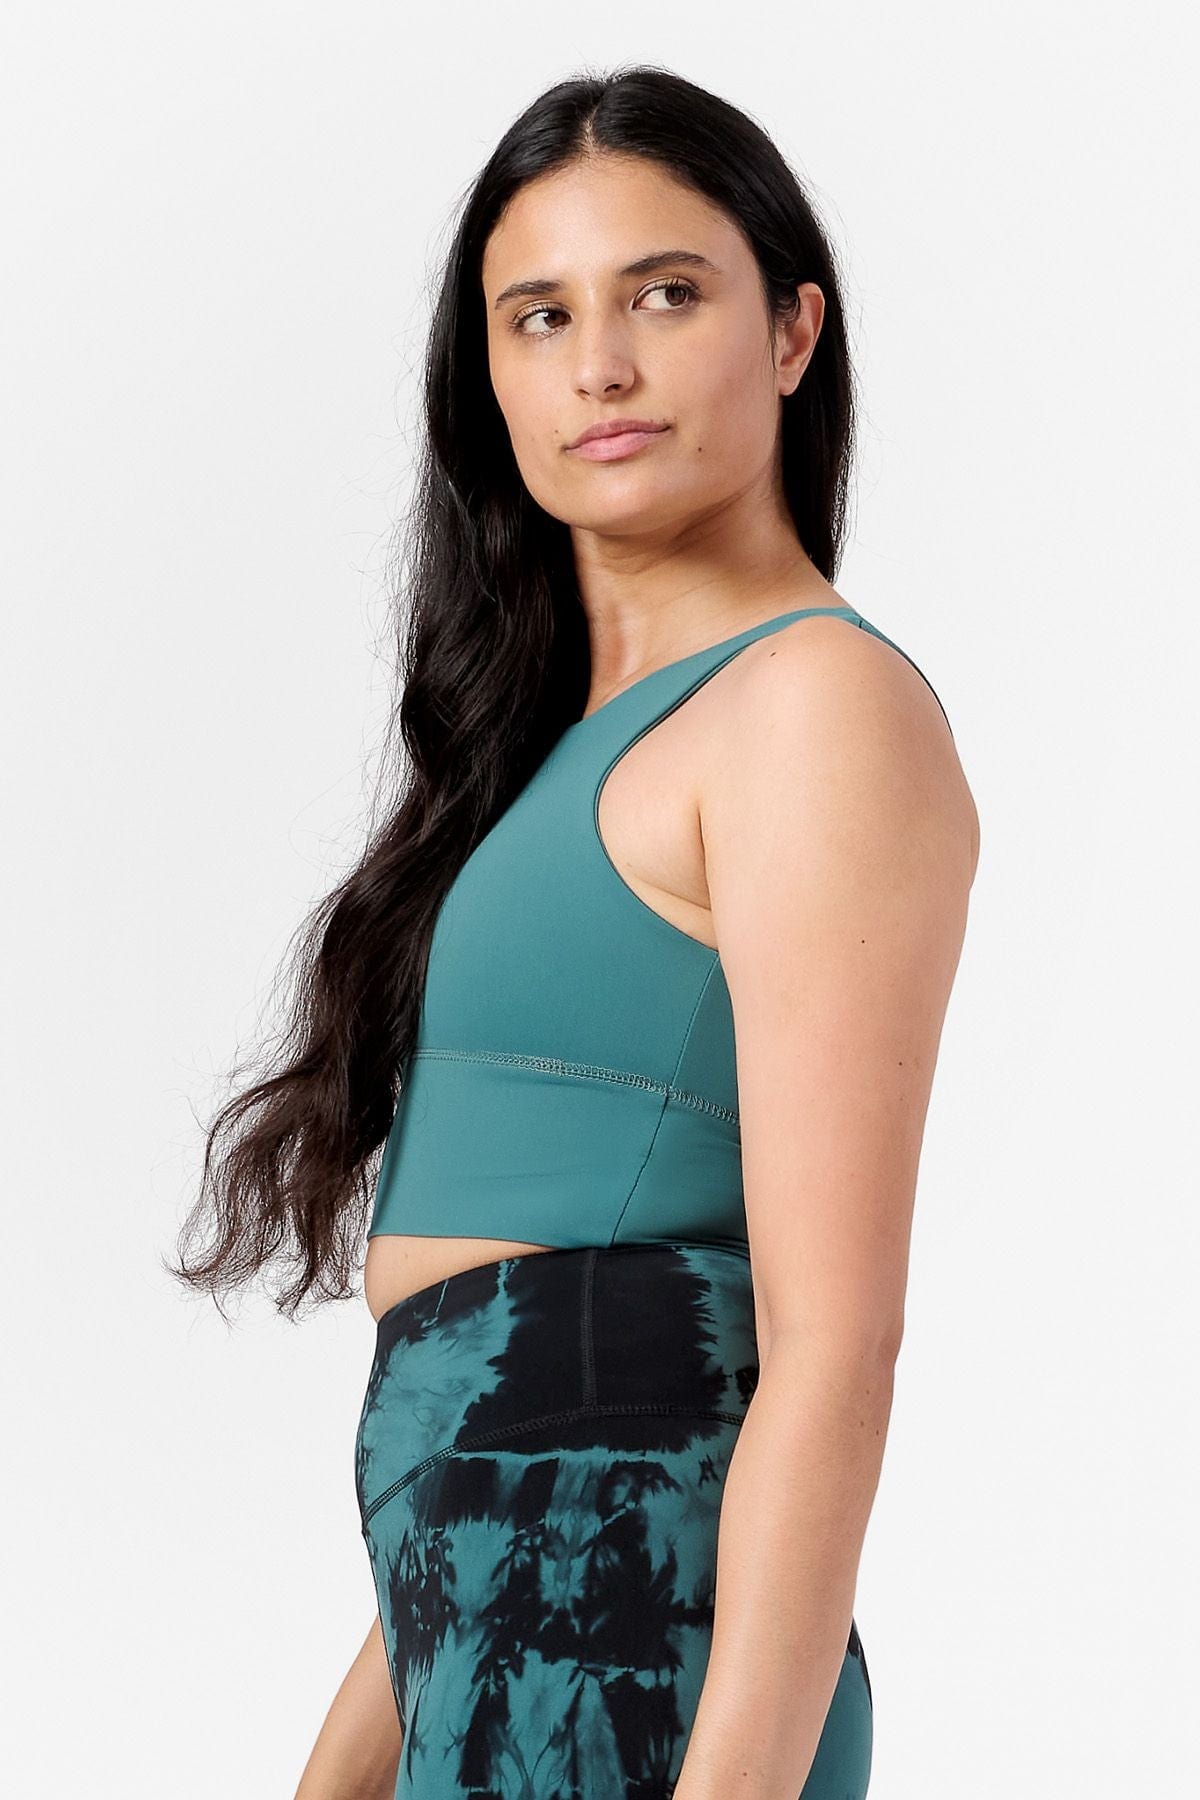 side view of a woman wearing a teal sports bra